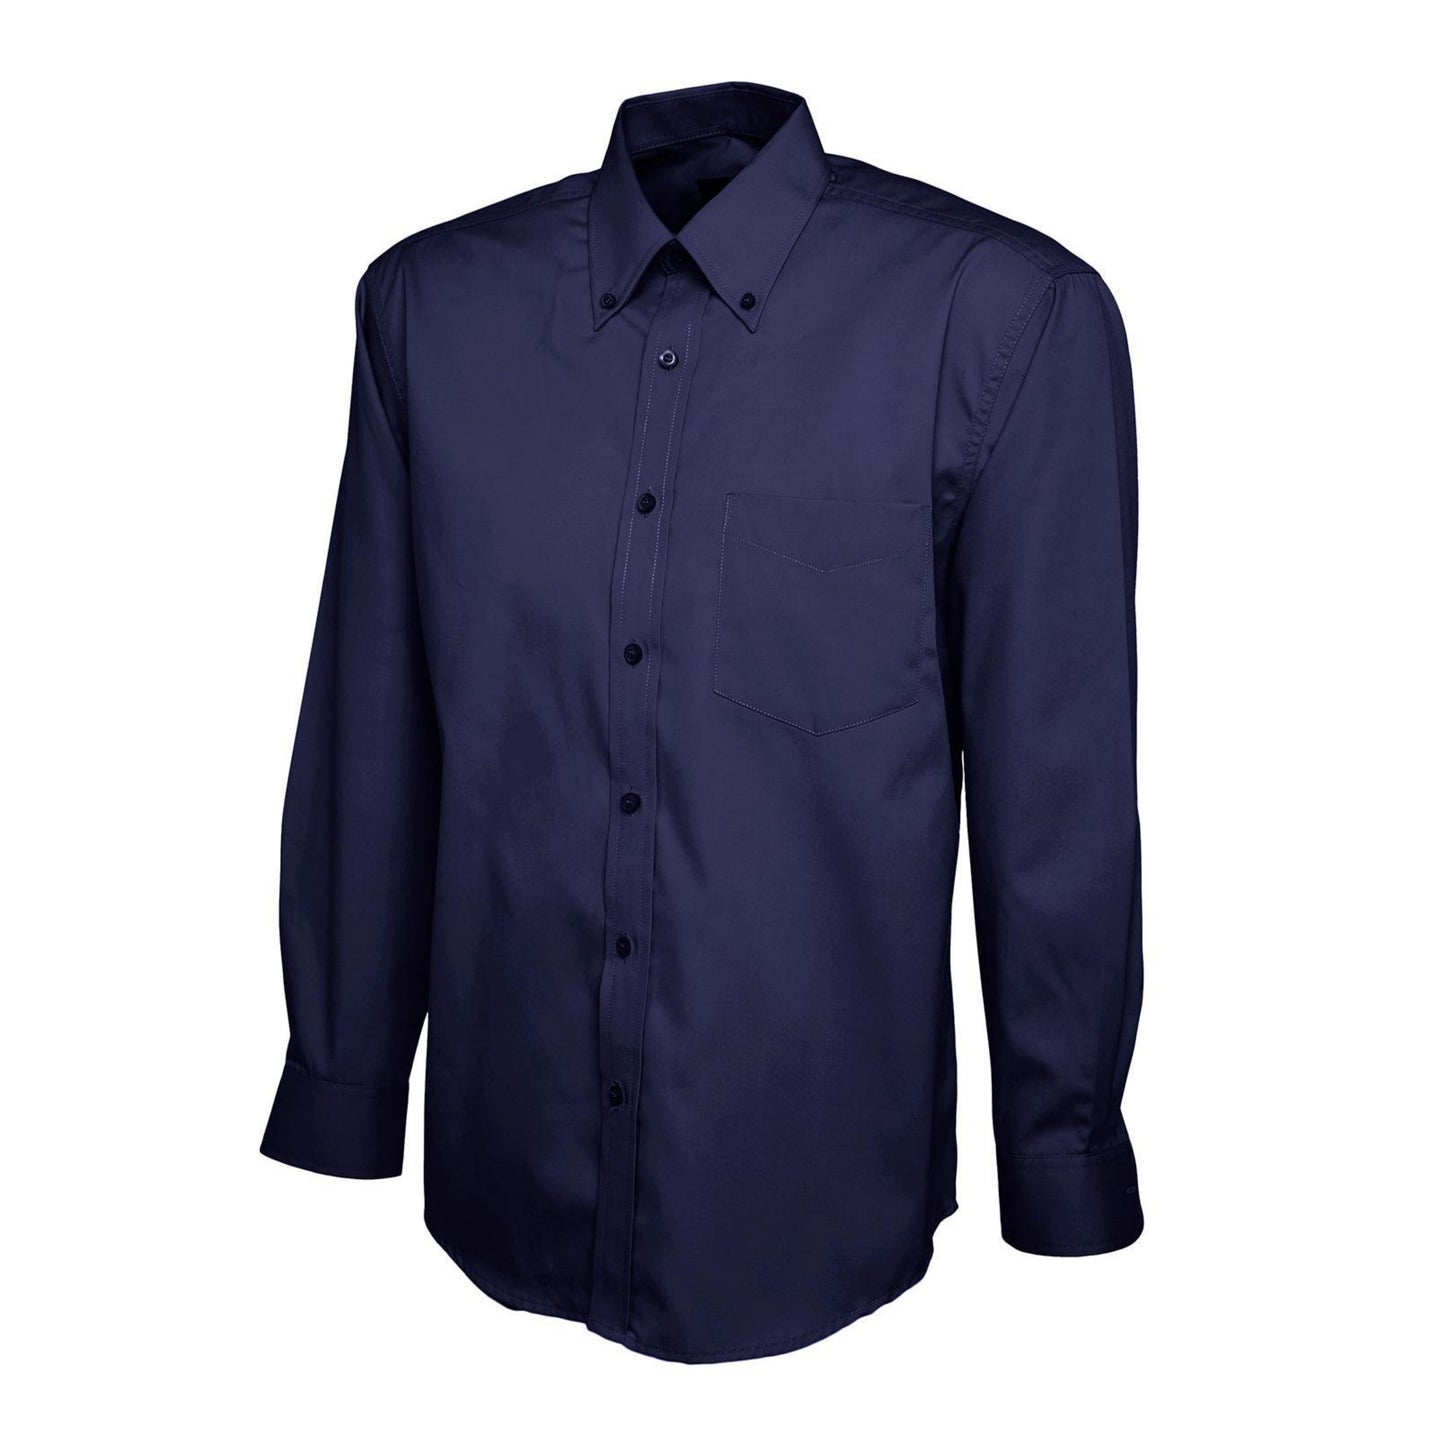 Men's Adaptive Clothing: Oxford Long Sleeve Shirt with Touch Close Fastenings - M201